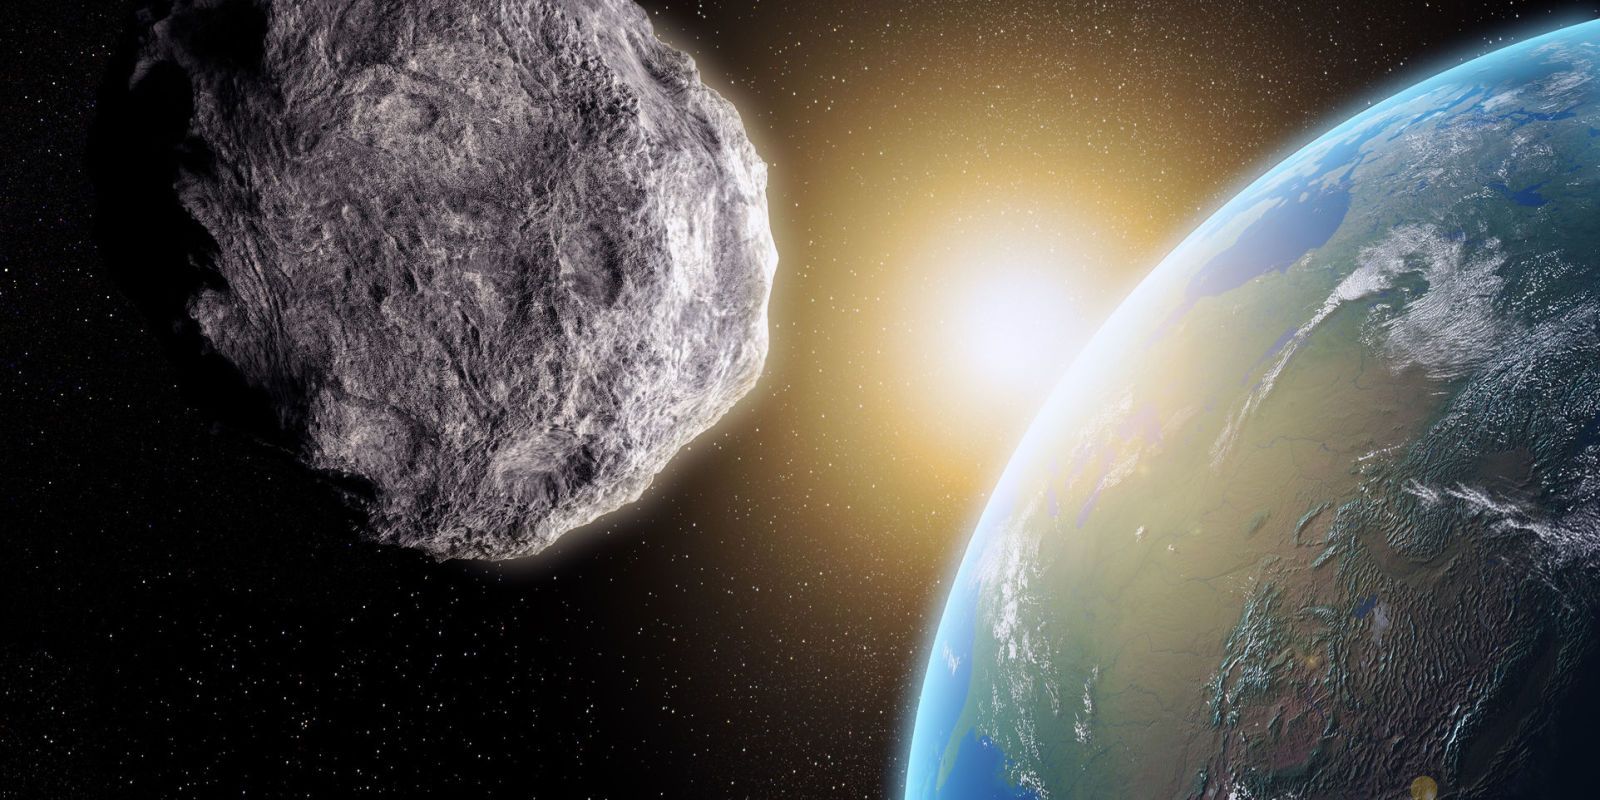 A Giant Asteroid Nicknamed The Rock Is Set To Fly By Earth Today